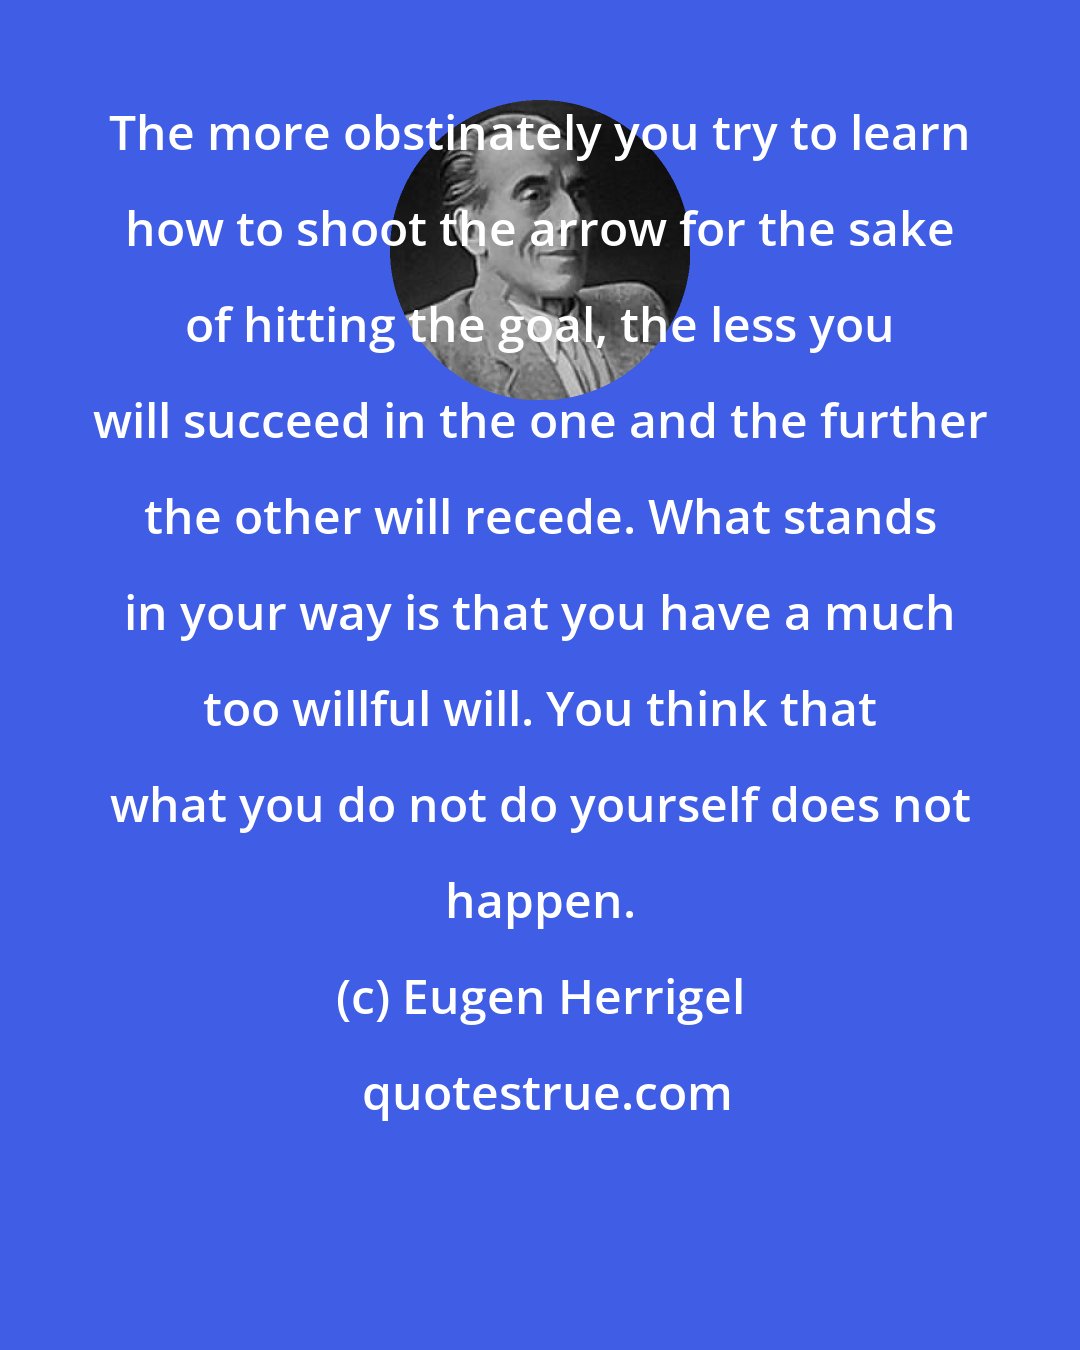 Eugen Herrigel: The more obstinately you try to learn how to shoot the arrow for the sake of hitting the goal, the less you will succeed in the one and the further the other will recede. What stands in your way is that you have a much too willful will. You think that what you do not do yourself does not happen.